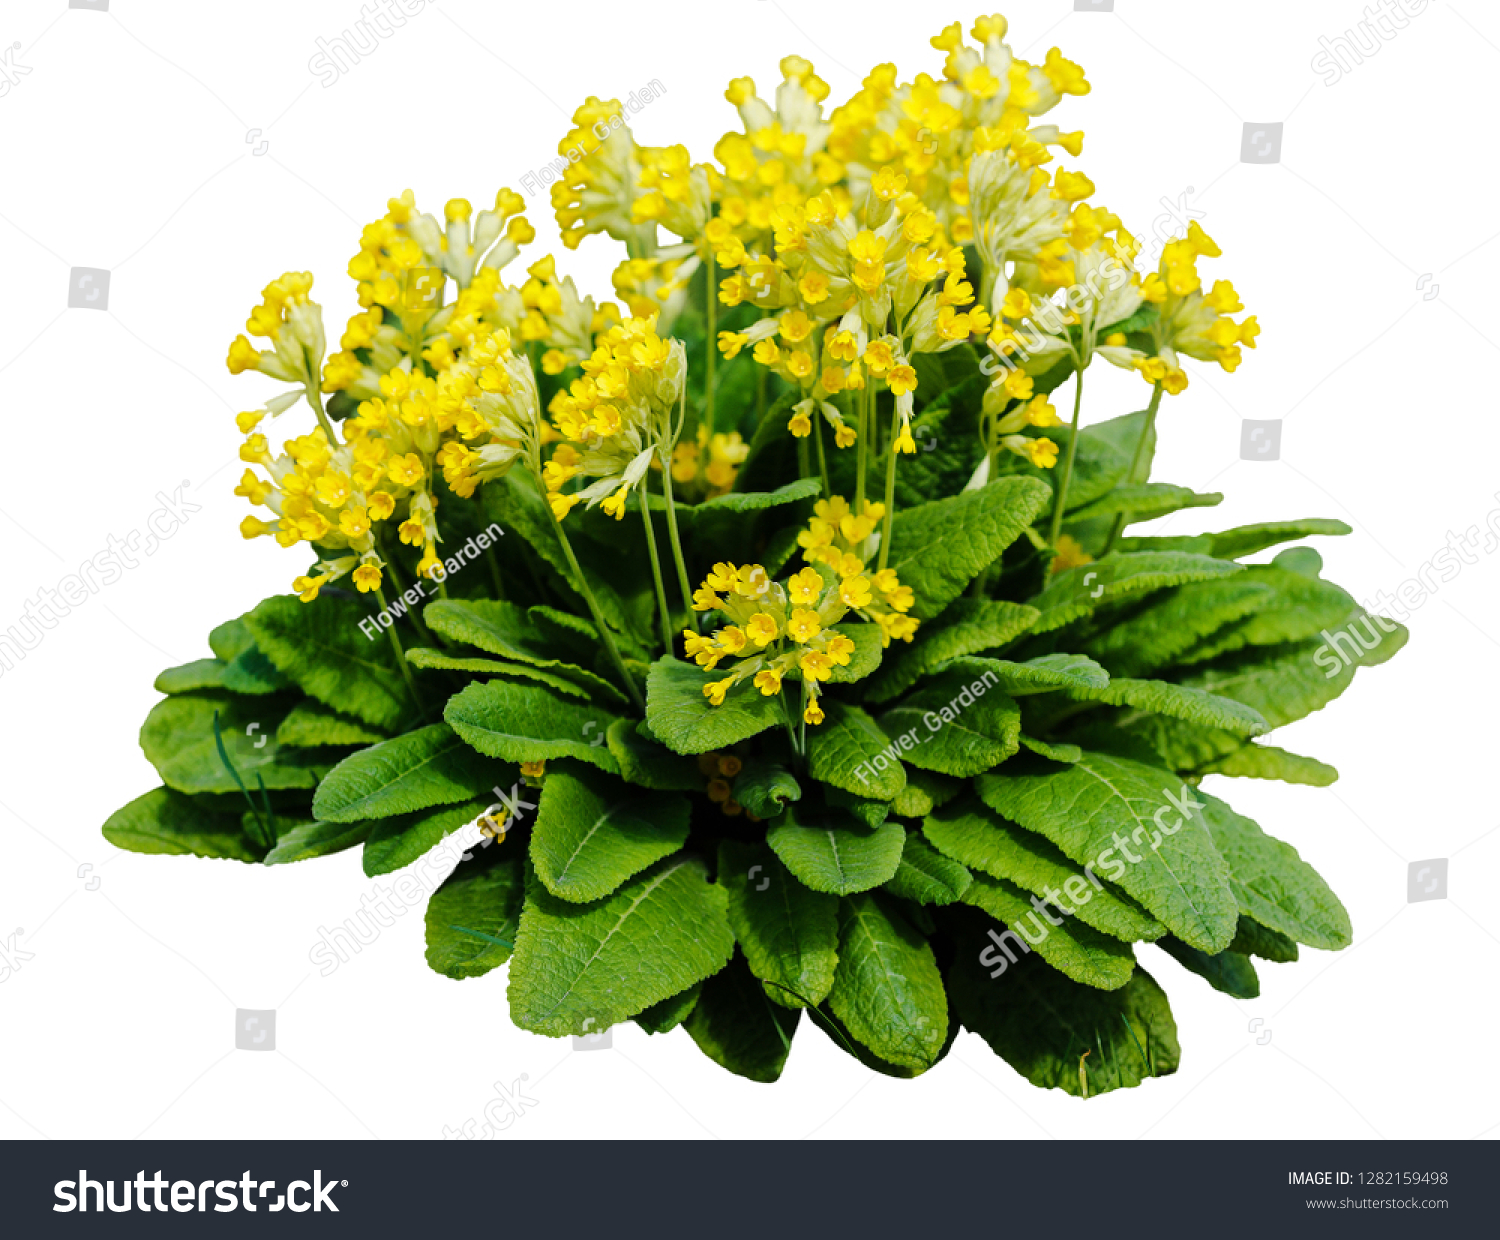 Yellow Cowslip Primrose flowers, Primula Veris on white background isolated #1282159498